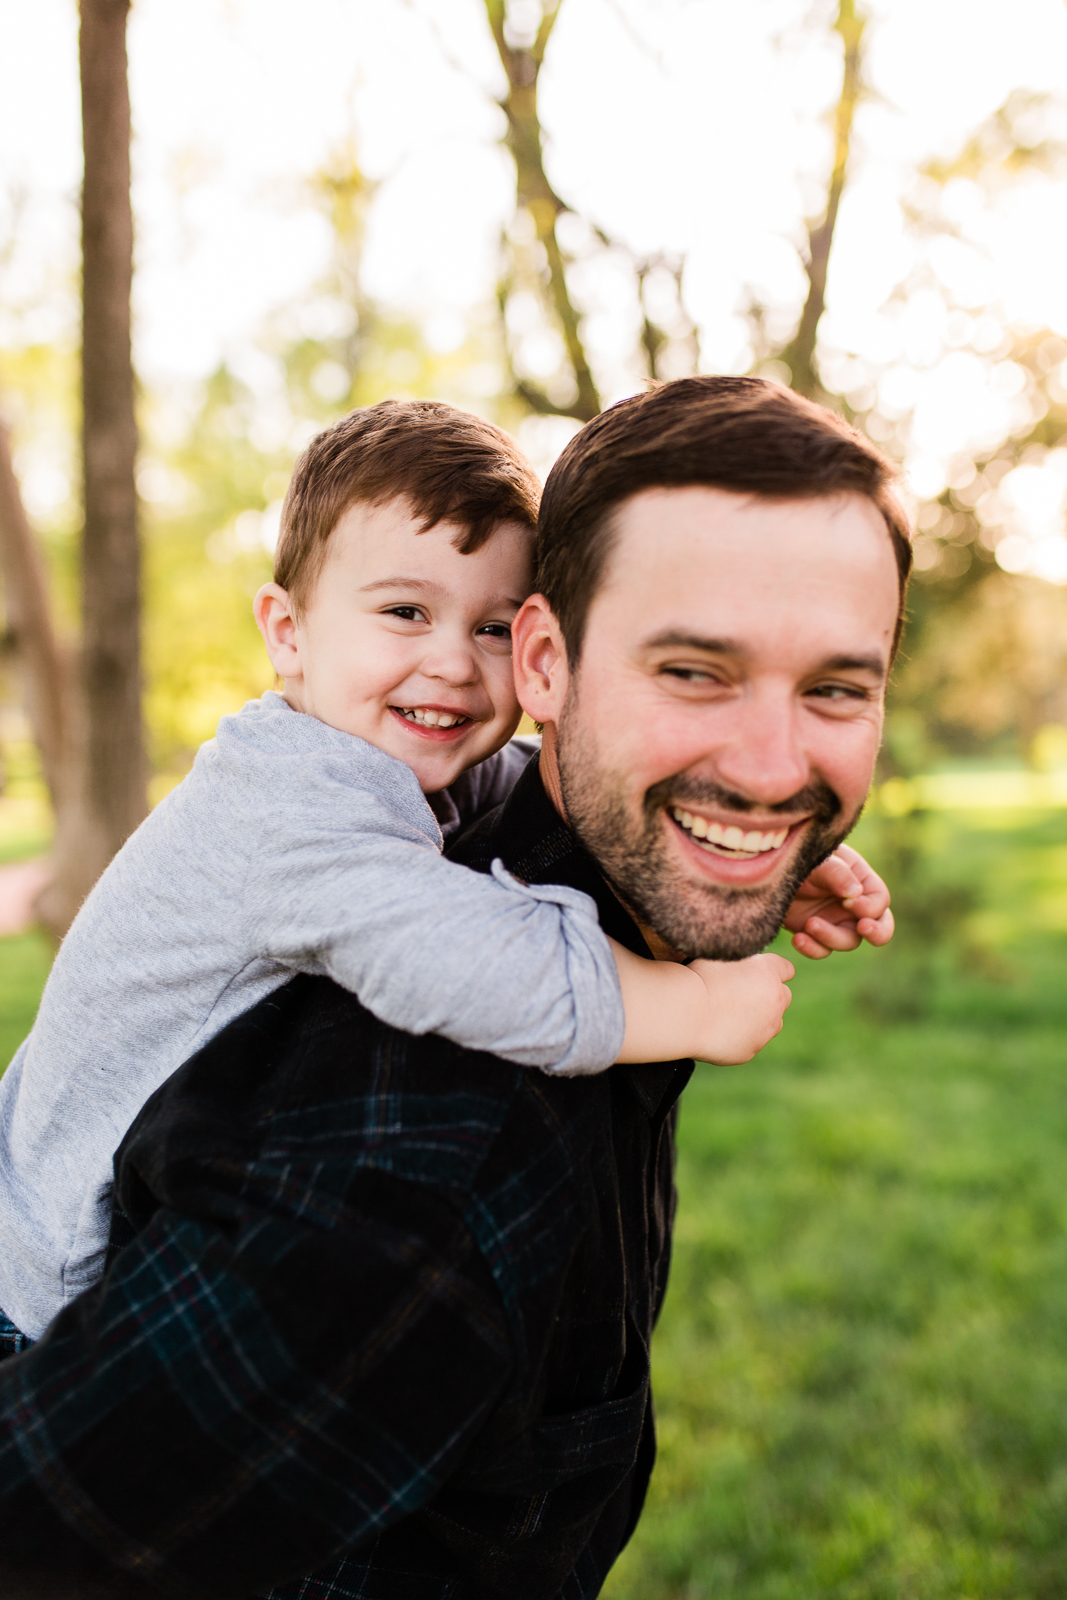  Father gives his son a piggyback ride in the park, Kansas City family photographer, Rebecca Clair Photography 